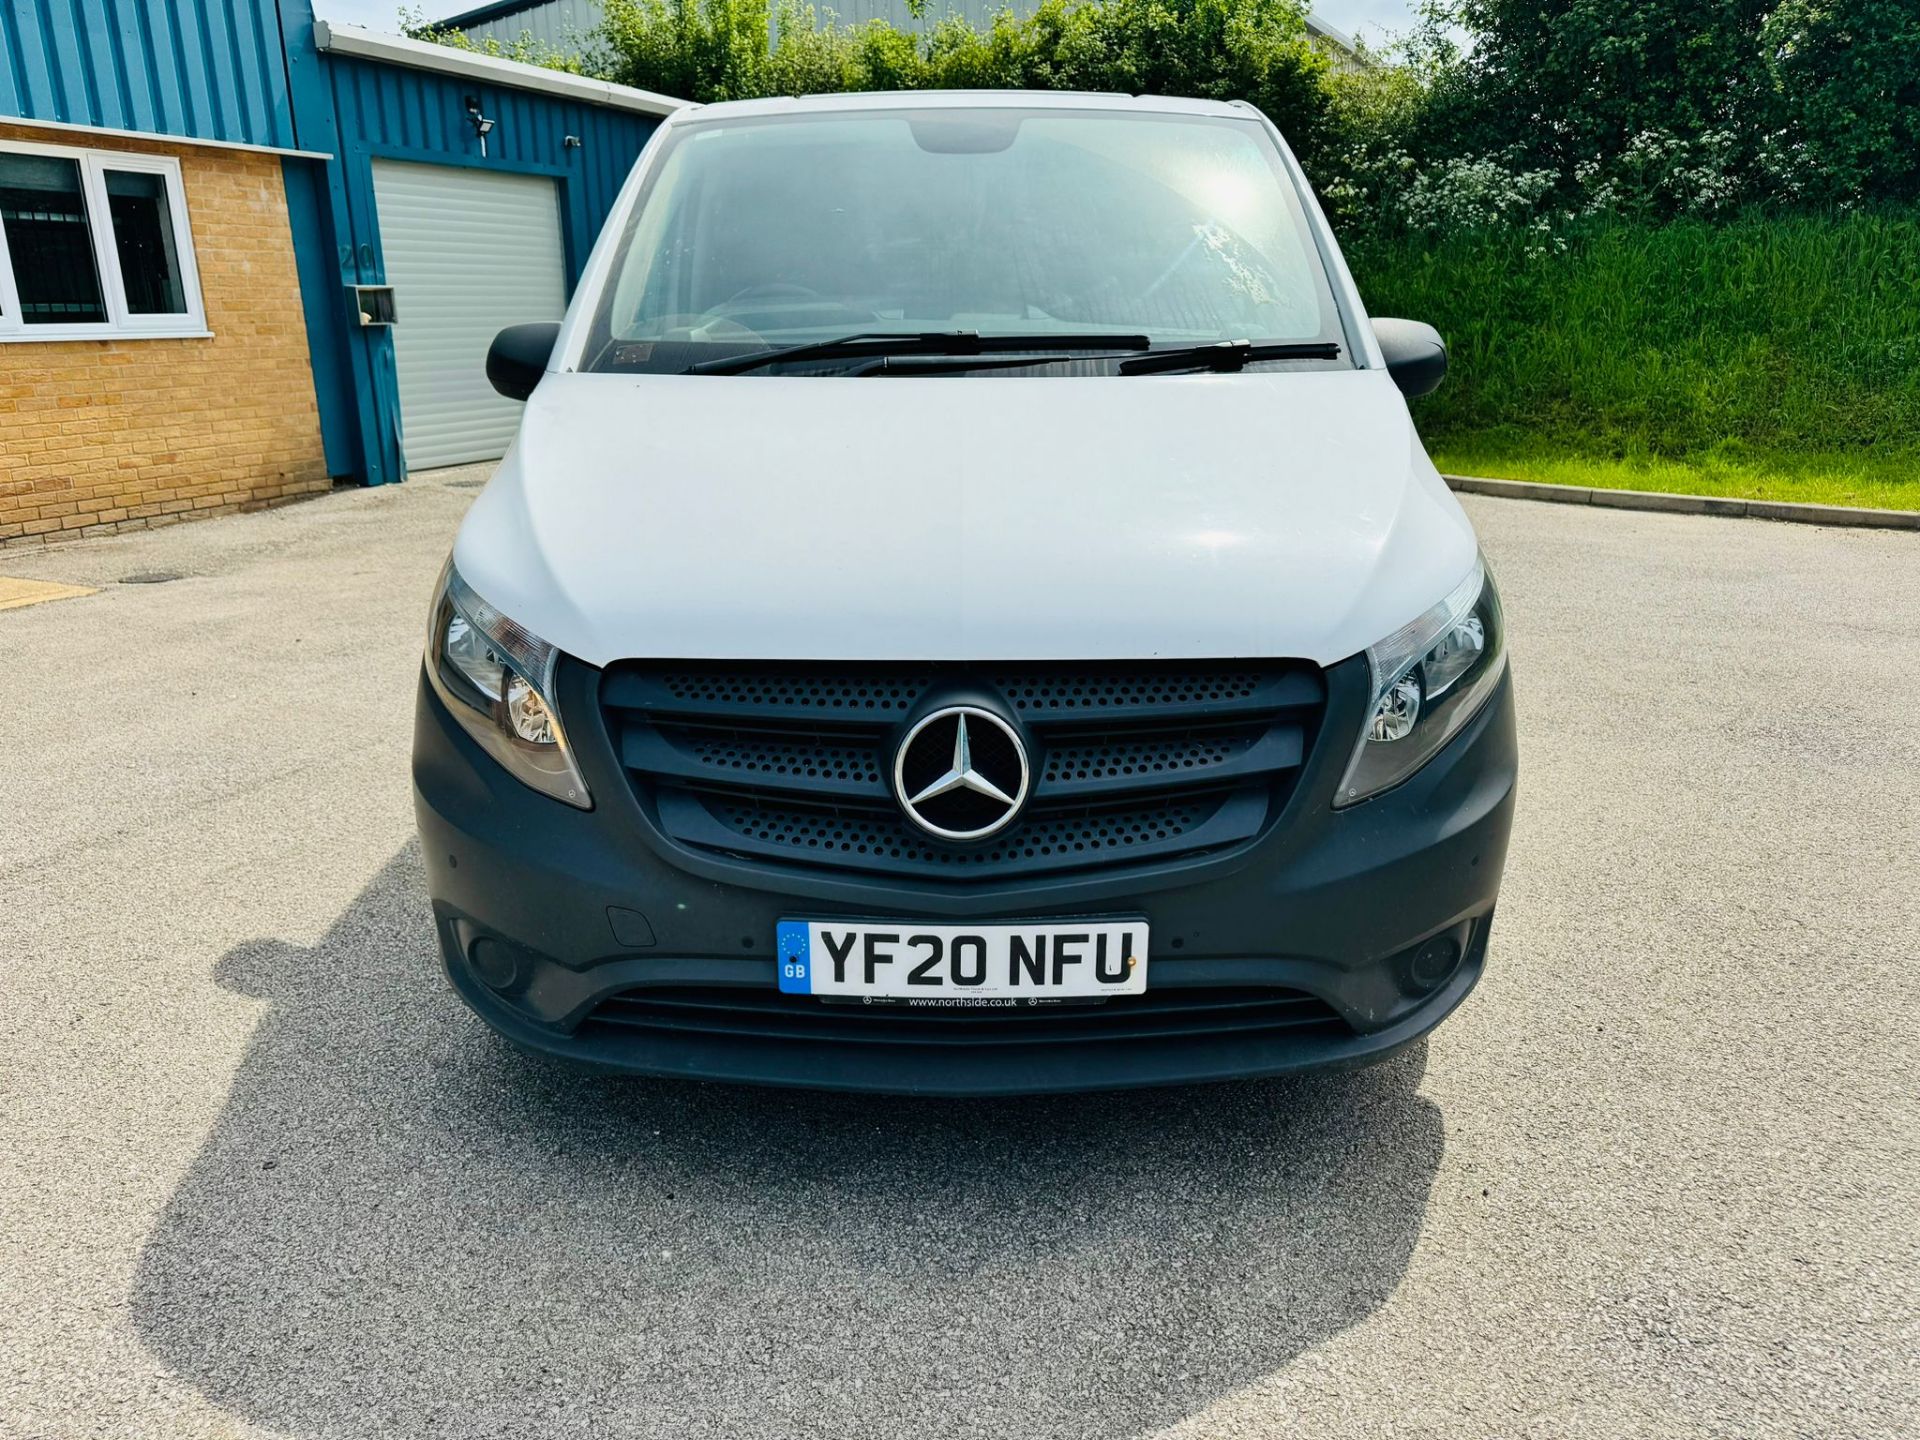 MERCEDES BENZ VITO CDI PURE - 2020 20 Reg - Only 74k Miles - 1 Owner From New - Parking Sensors - Image 6 of 21